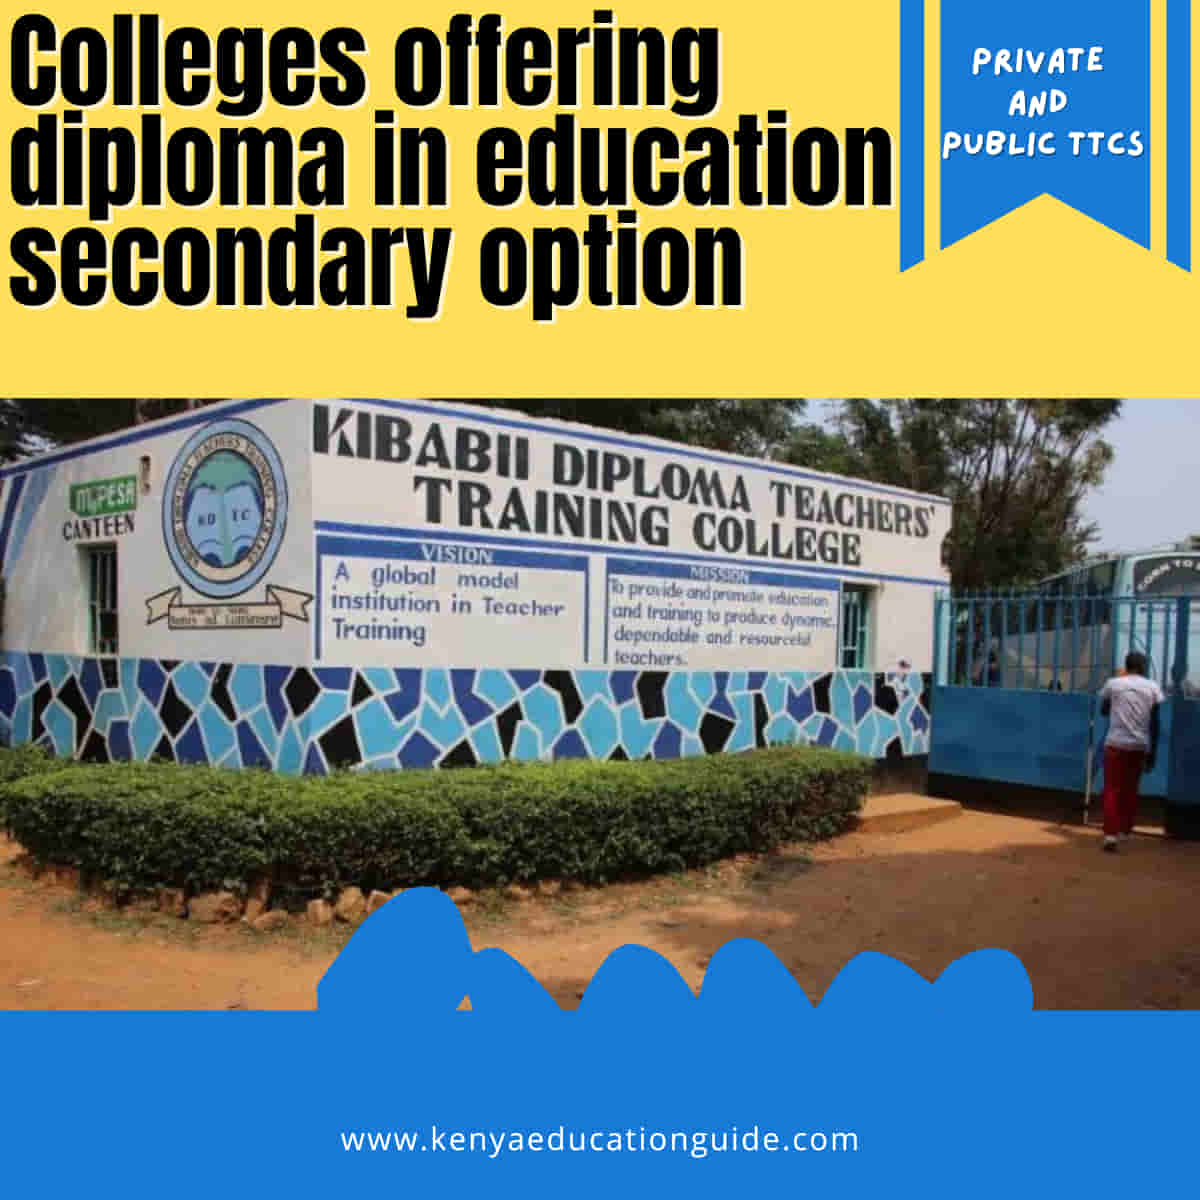 Colleges offering diploma in education secondary option